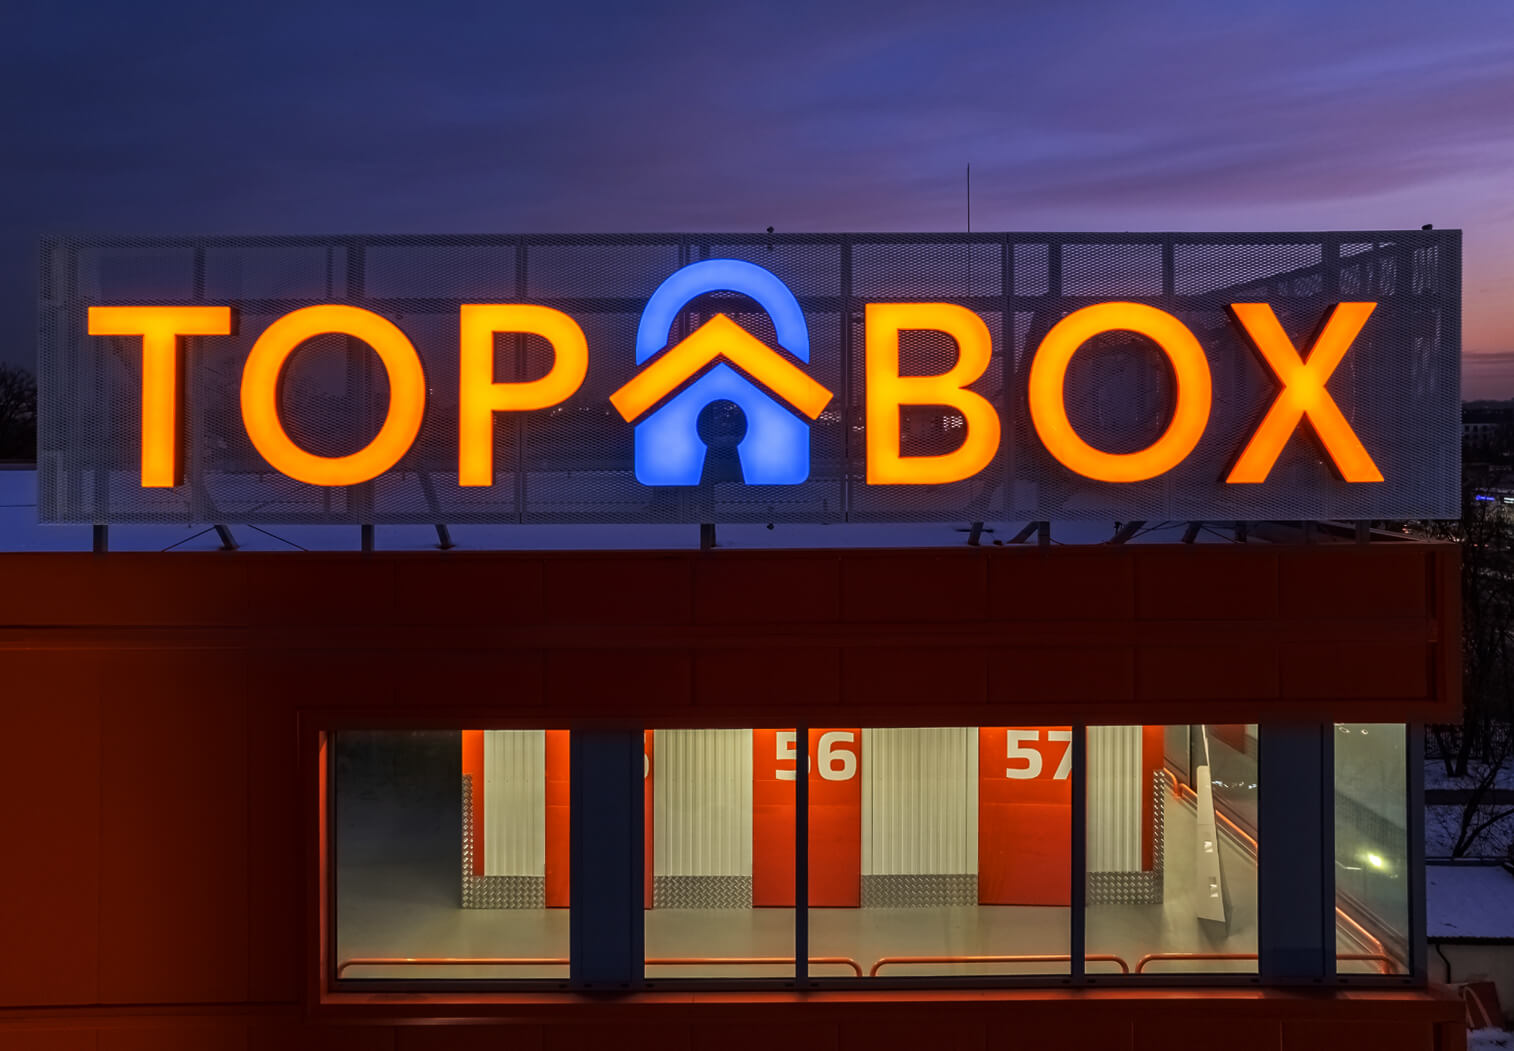 TOP BOX - Letters along with the logo, illuminating the front, above the entrance